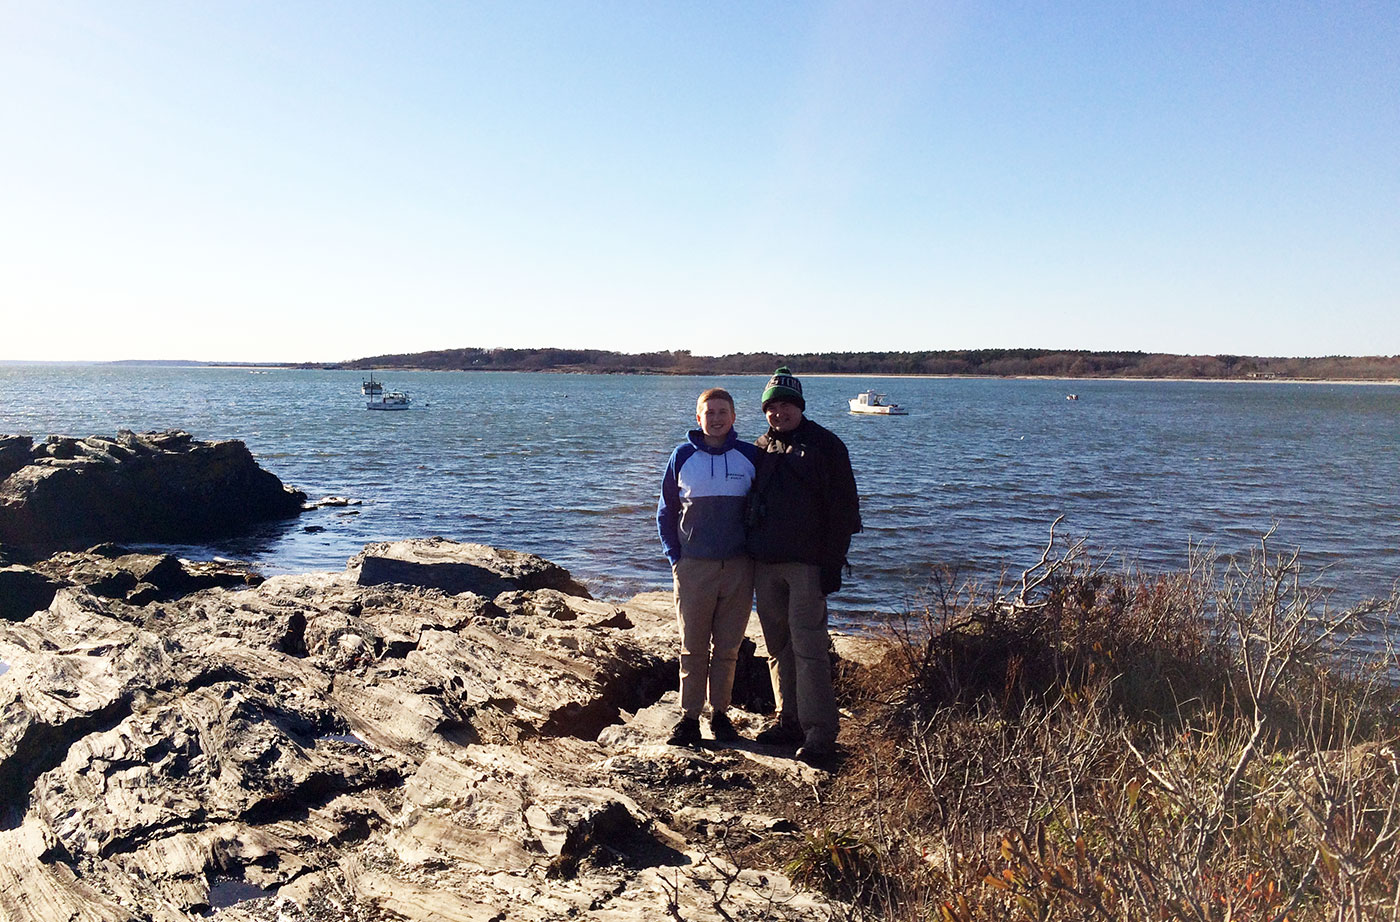 Birding at Kettle Cove